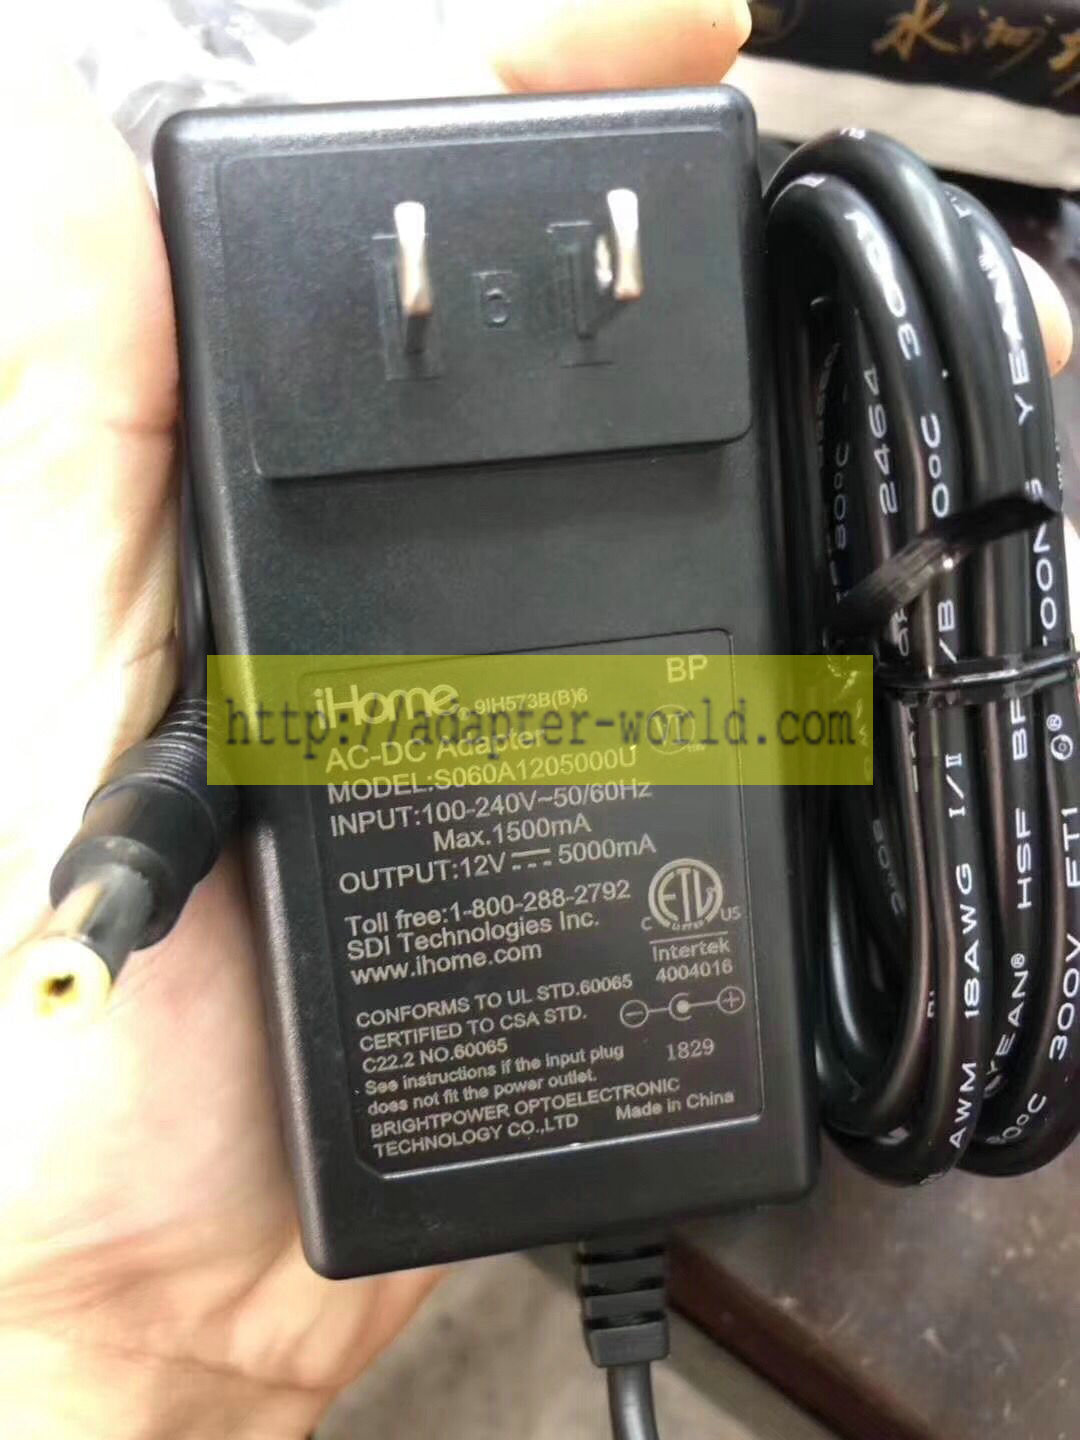 *Brand NEW* iHome S060A1205000U 12V 5000m AC DC Adapter POWER SUPPLY - Click Image to Close